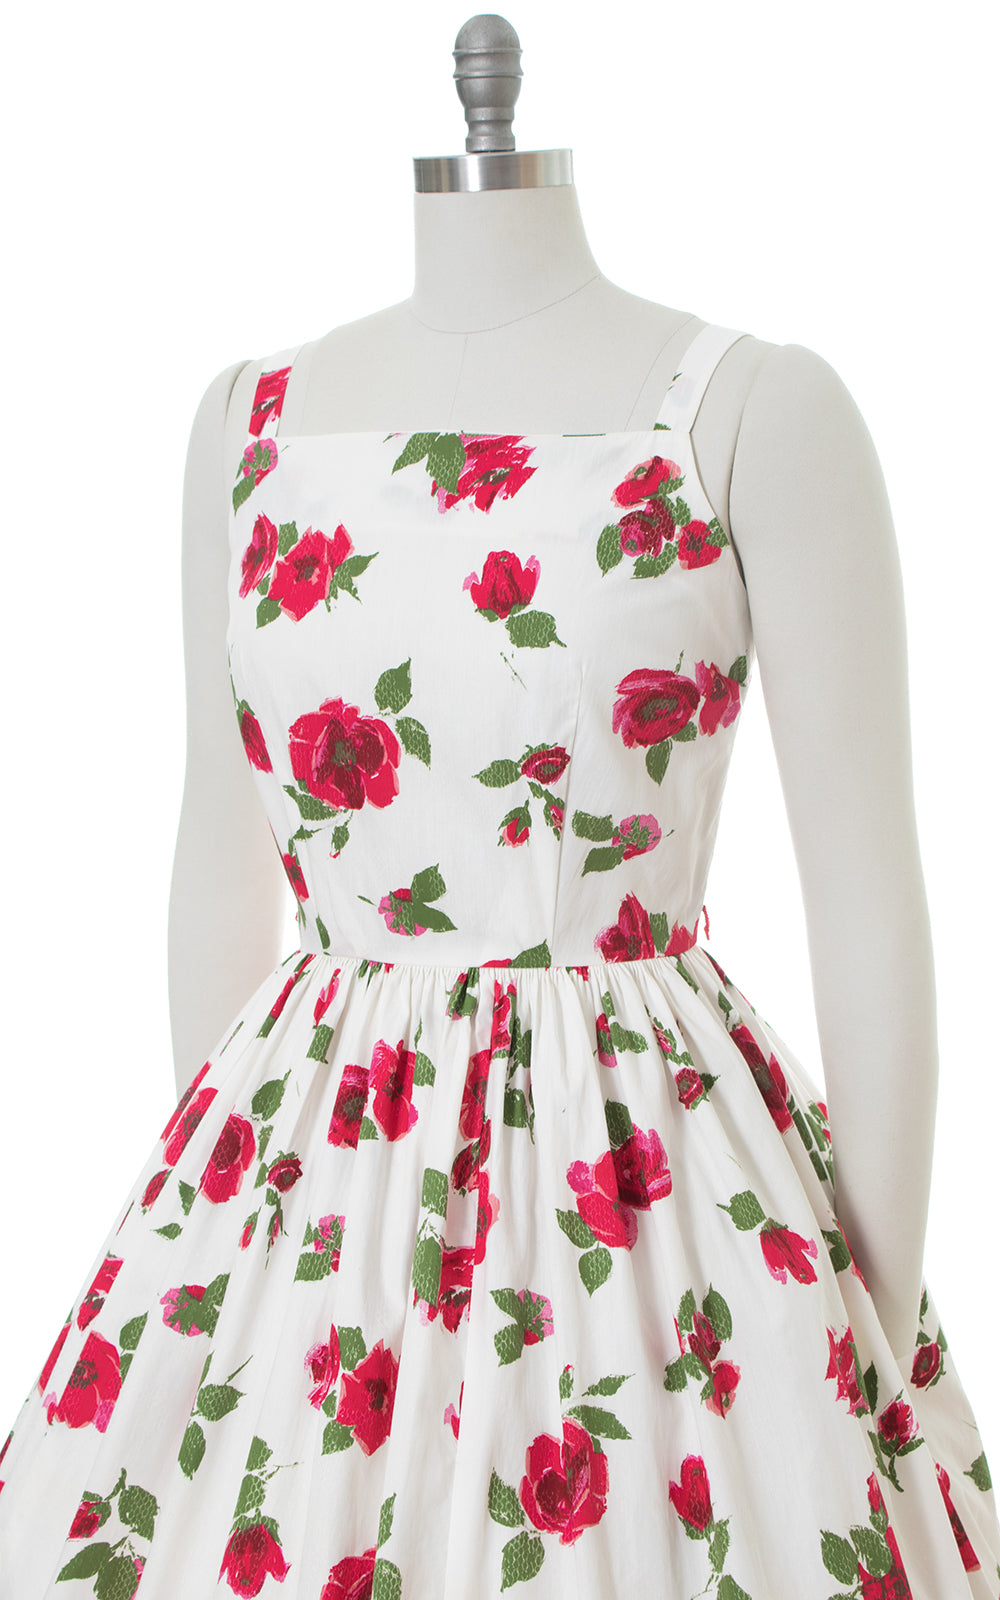 1950s Floral Cotton Hot Pink White Sundress